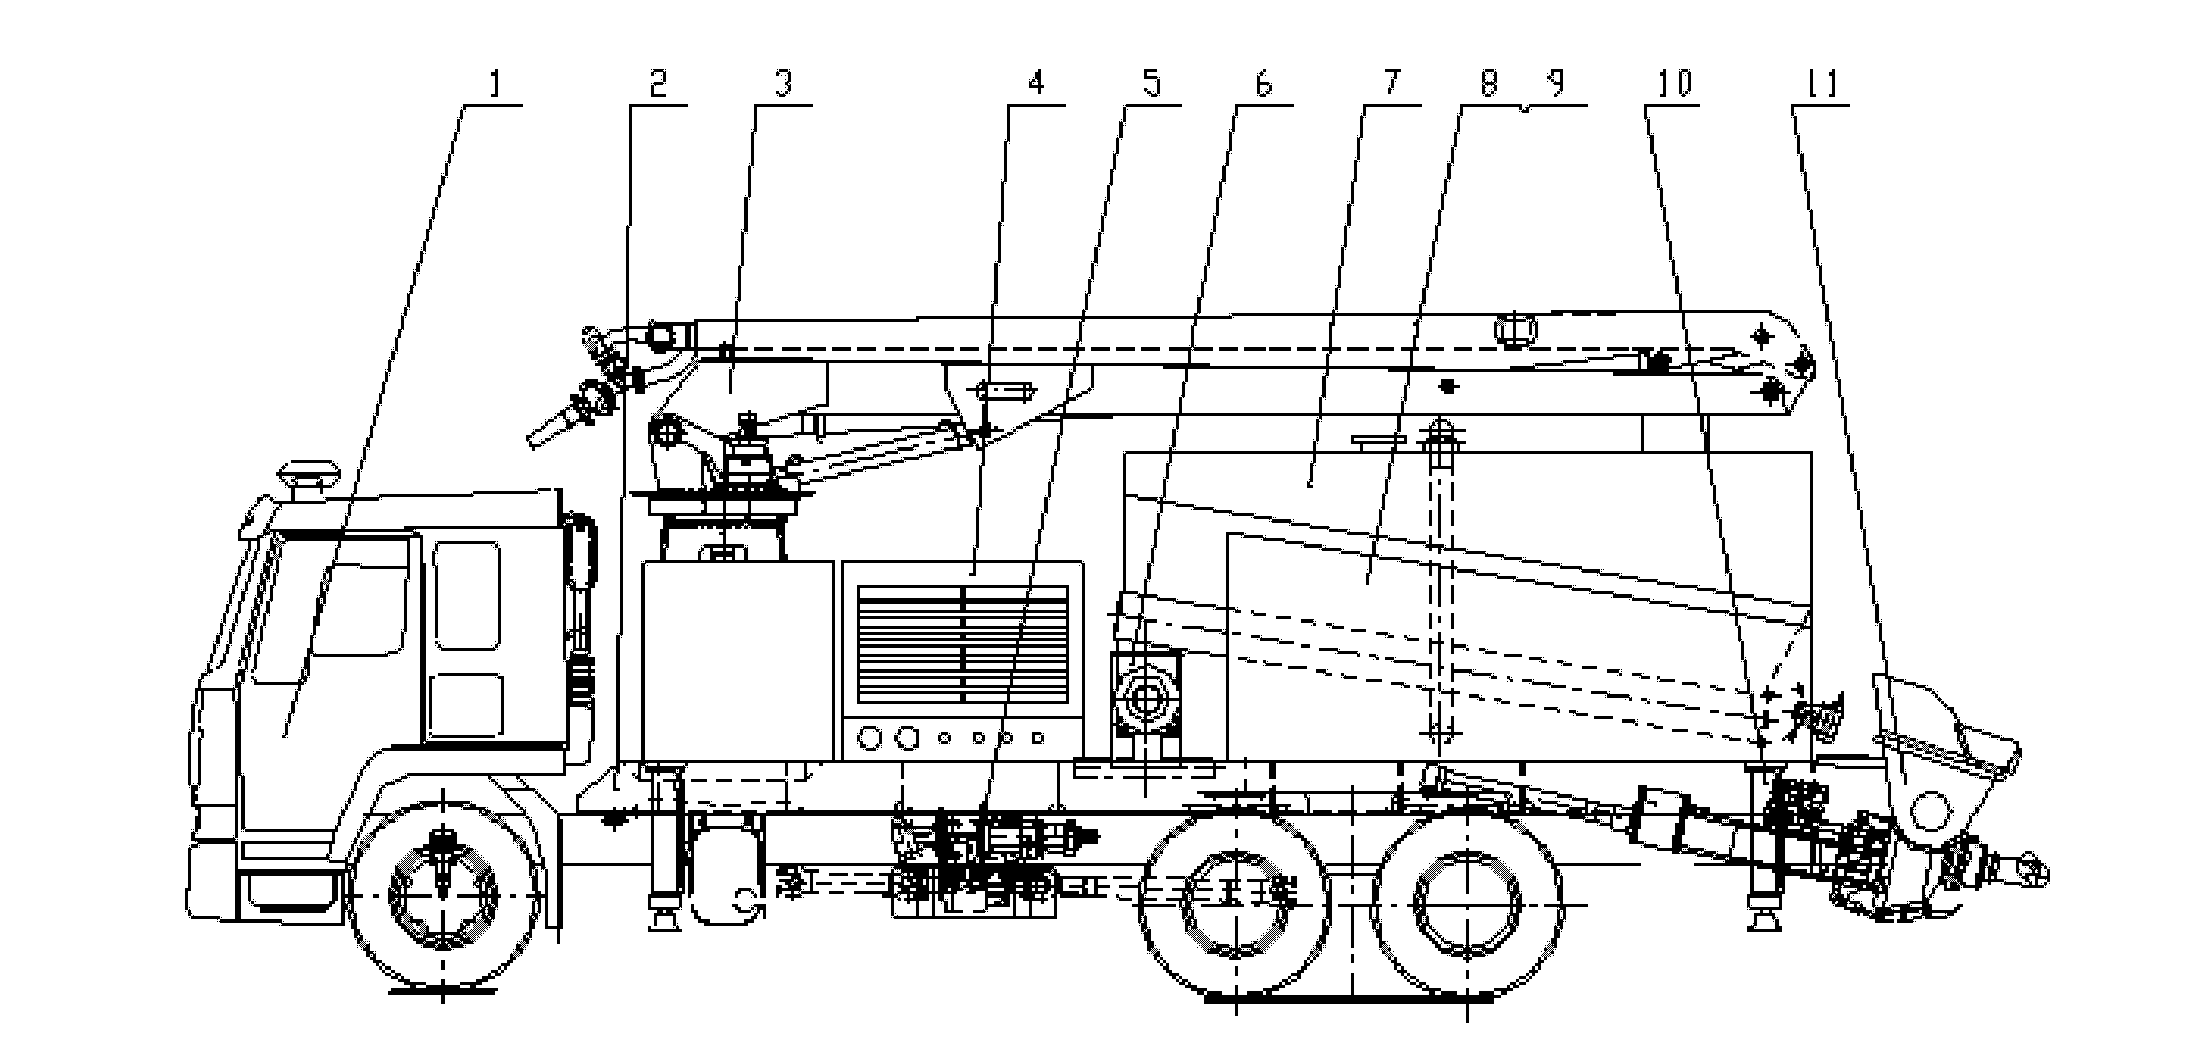 Multi-functional fire-fighting combined injection unit, multi-functional fire-fighting combined device and fire engine